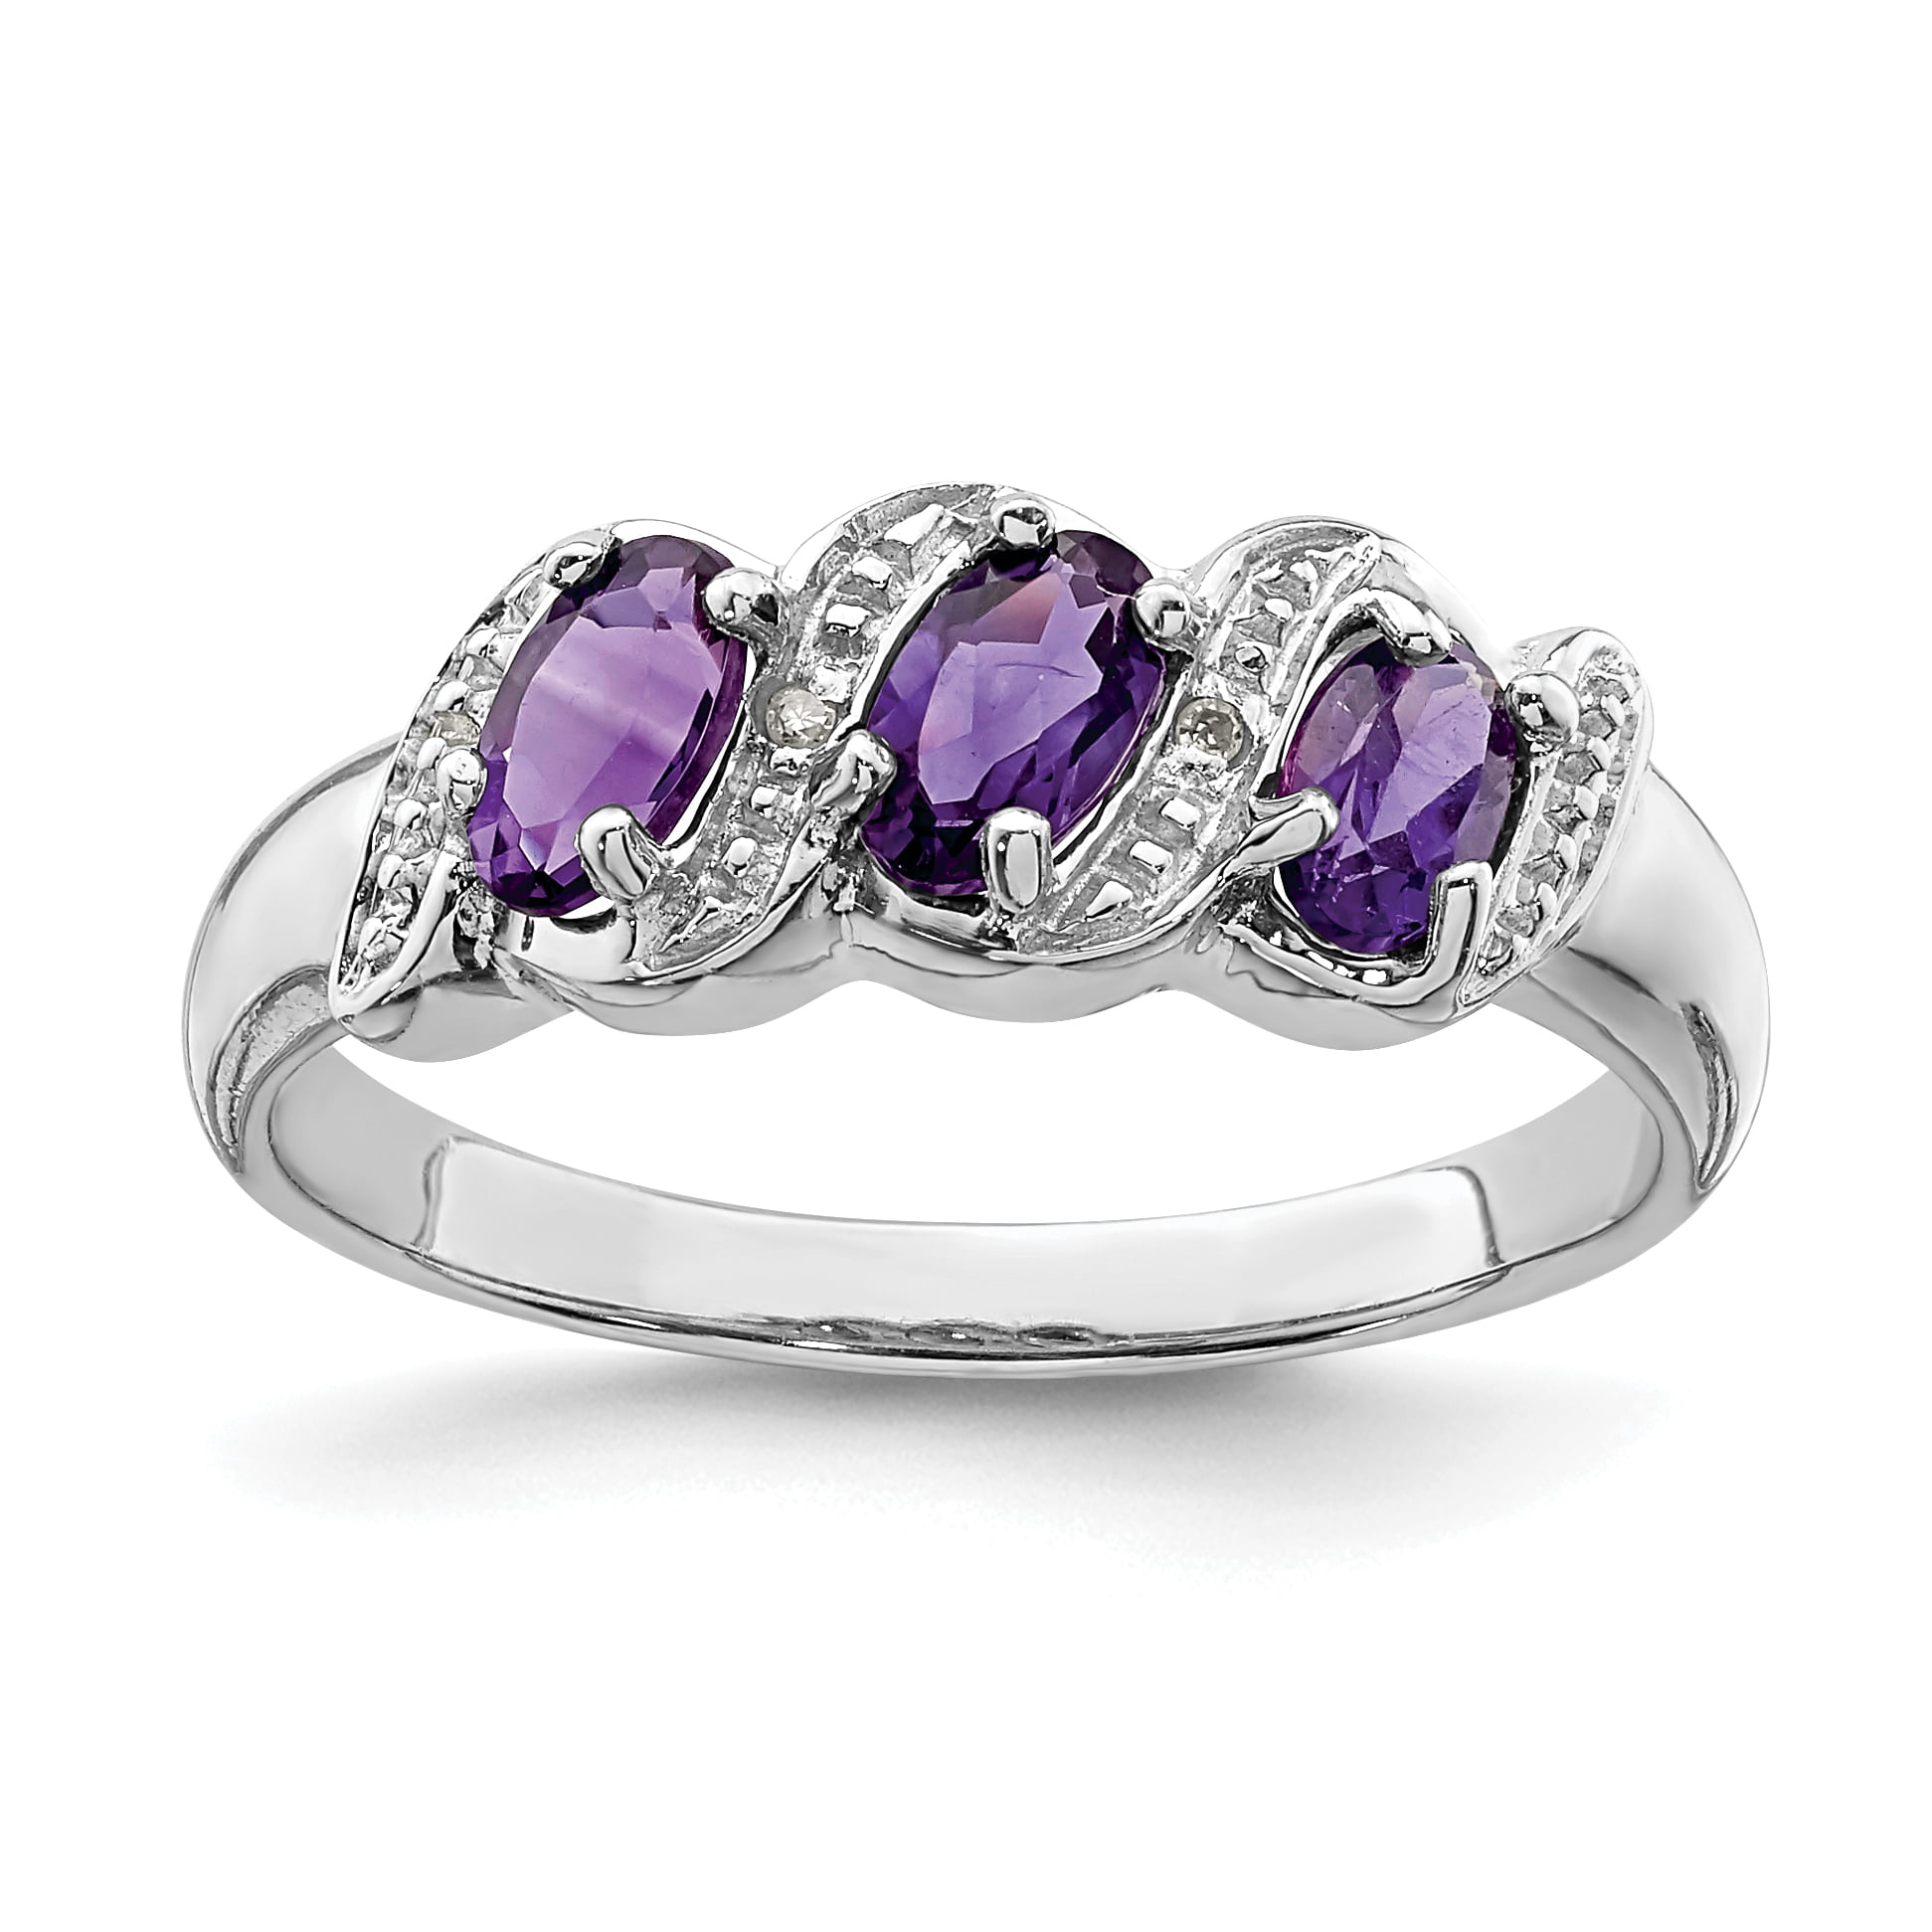 Solid 925 Sterling Silver Womens Stone Ring Statement Stone Ring Valentine Day Gift February Birthstone Amethyst Ring Soliitaire Ring Sterling Silver 